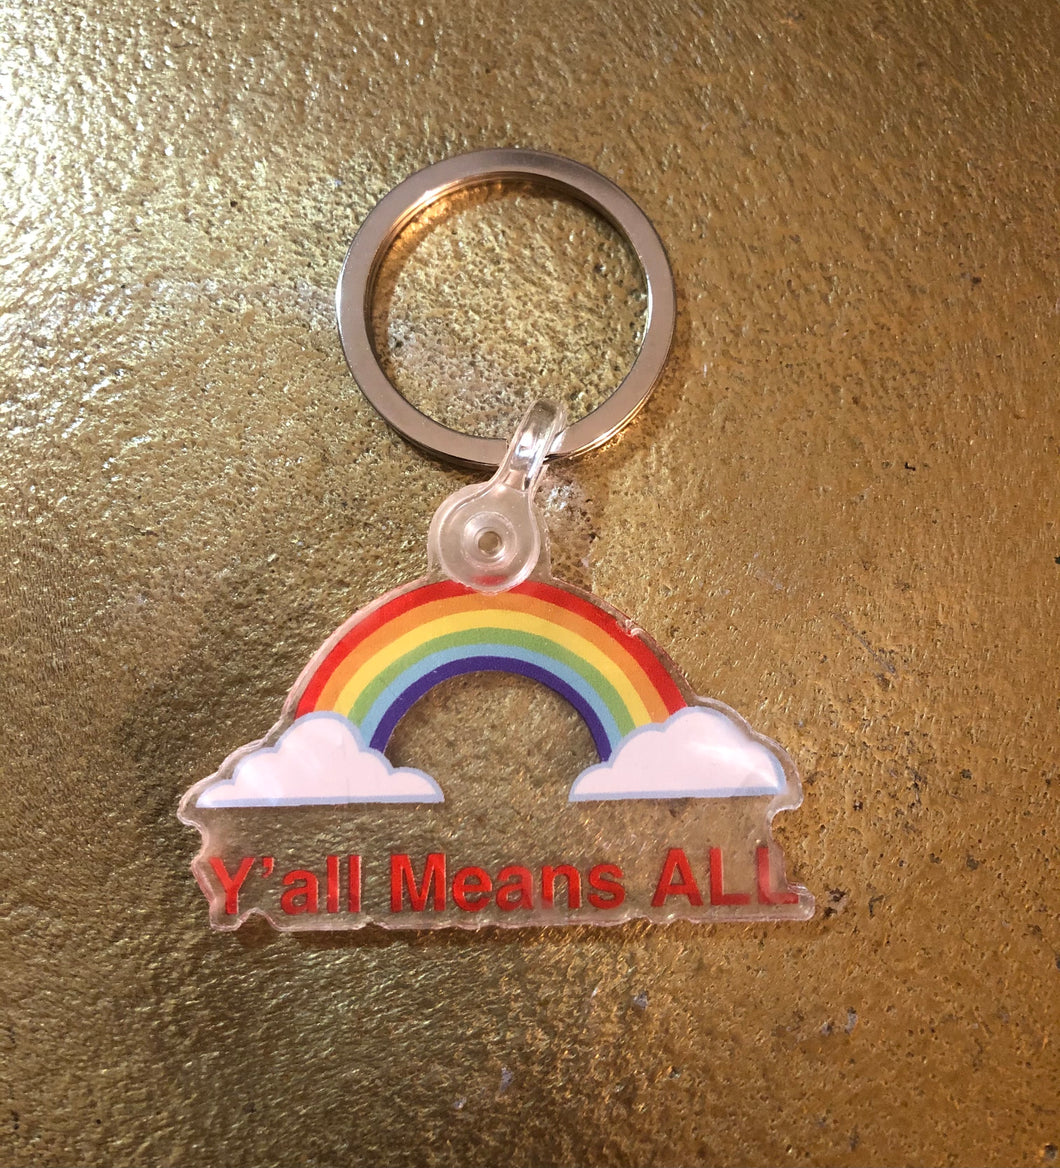 Y’all Means All Keychain